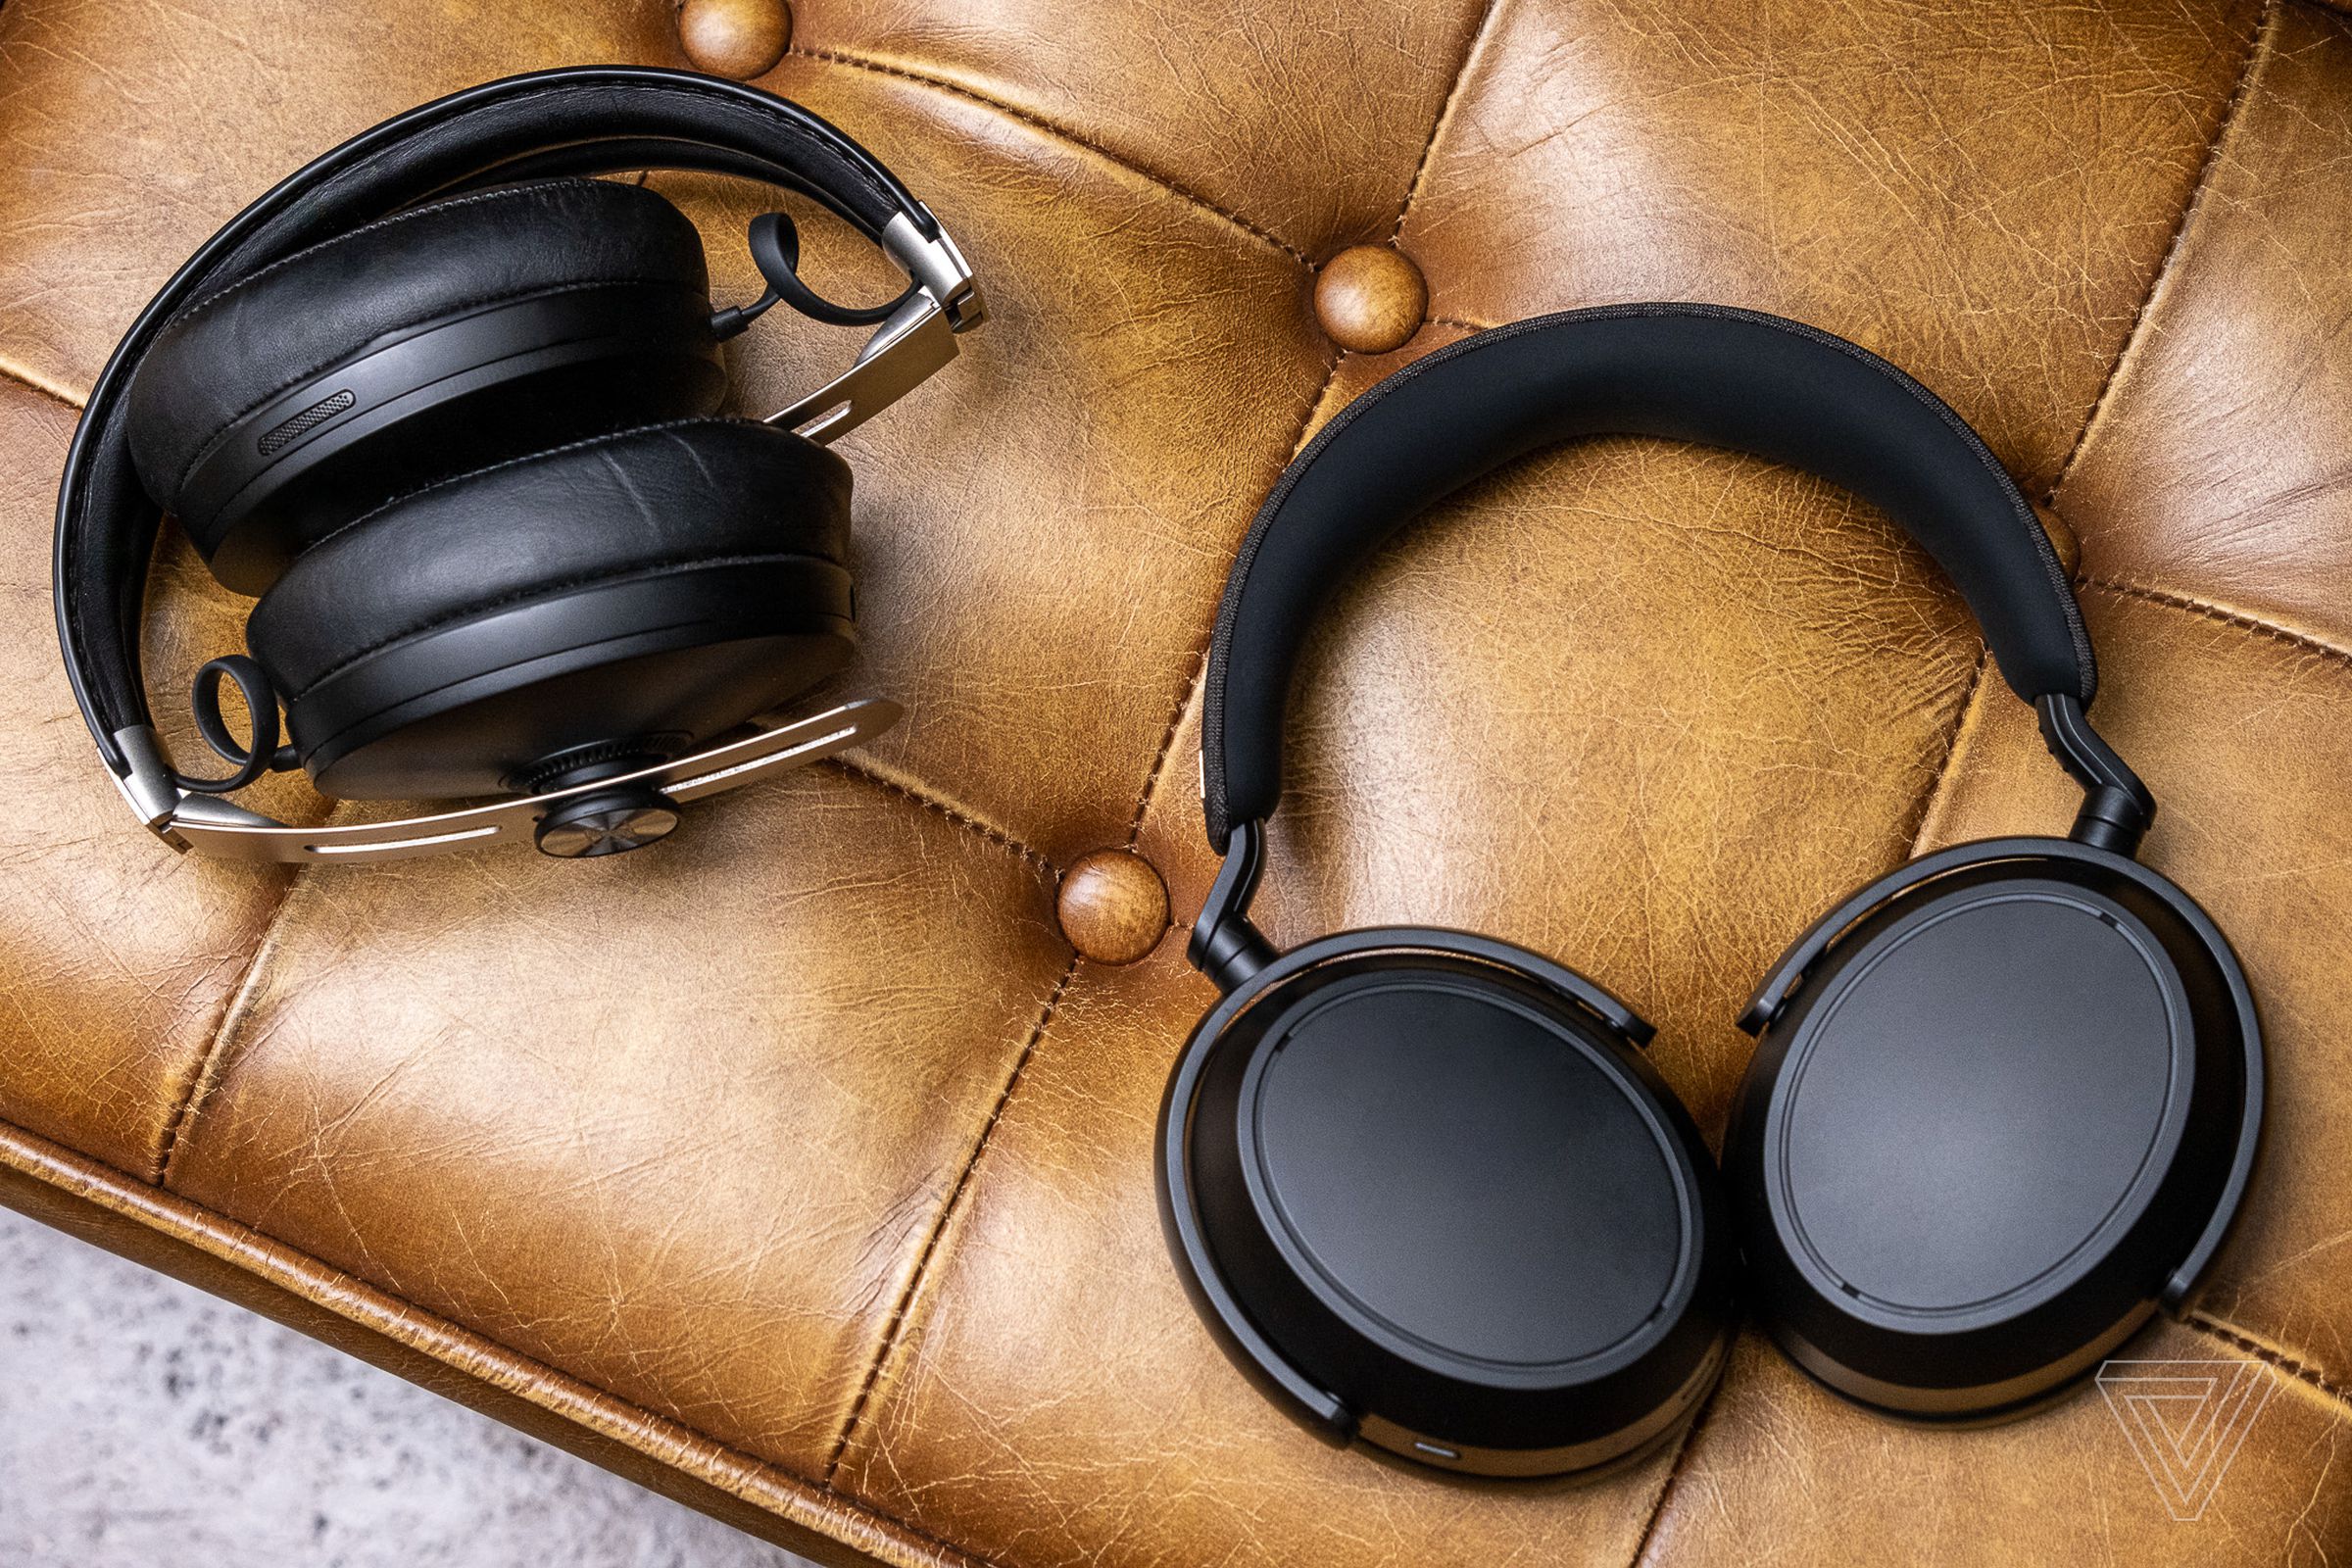 The Sennheiser Momentum 4s don’t fold up, but they can lie flat in the case (or around your neck).   